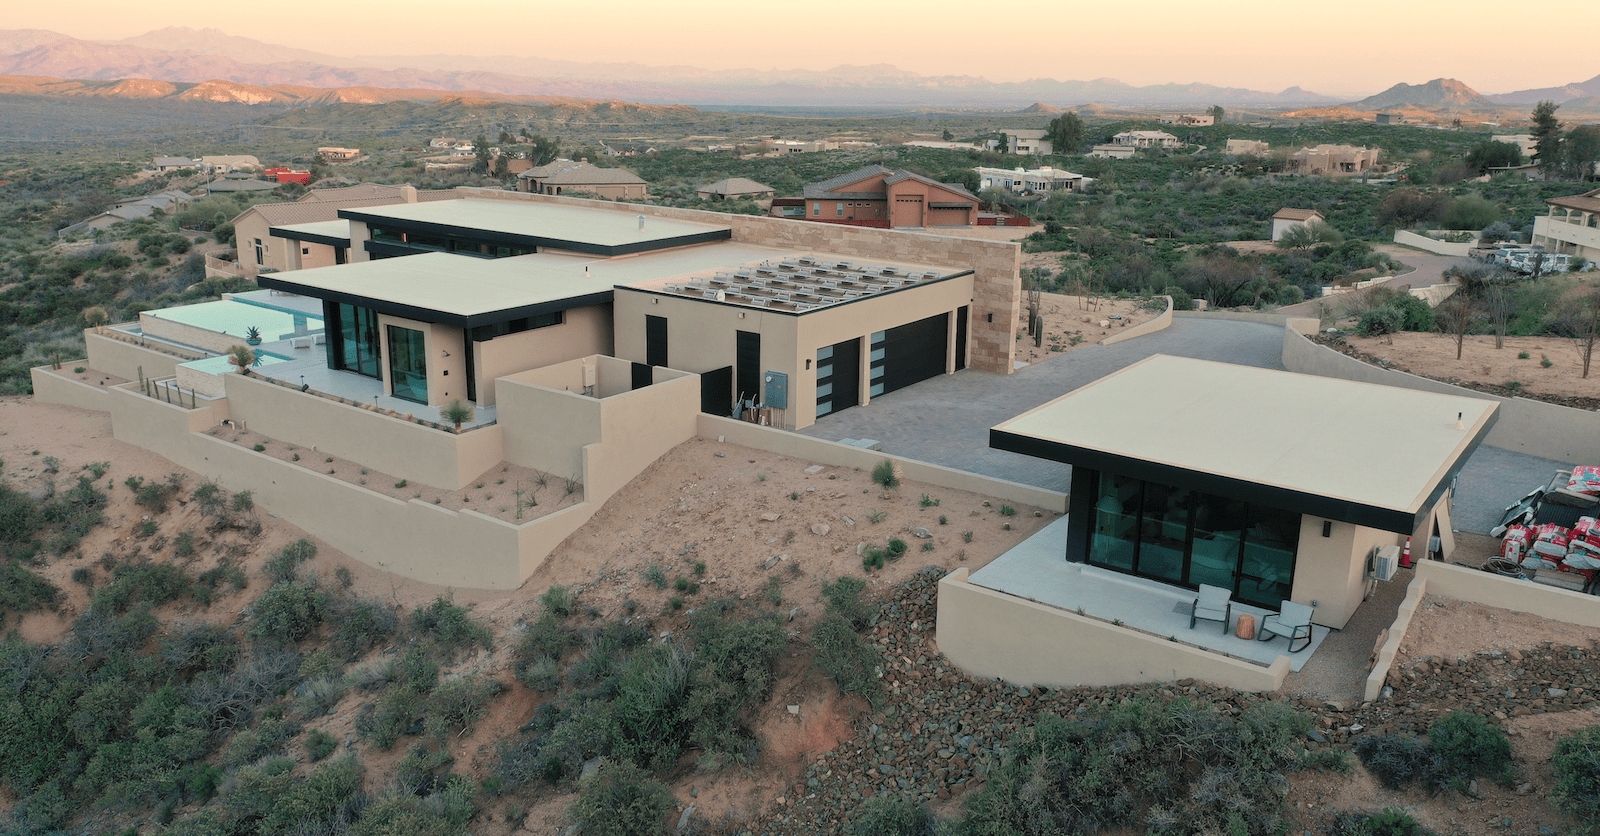 Aerial view of the Desert Comfort Idea Home